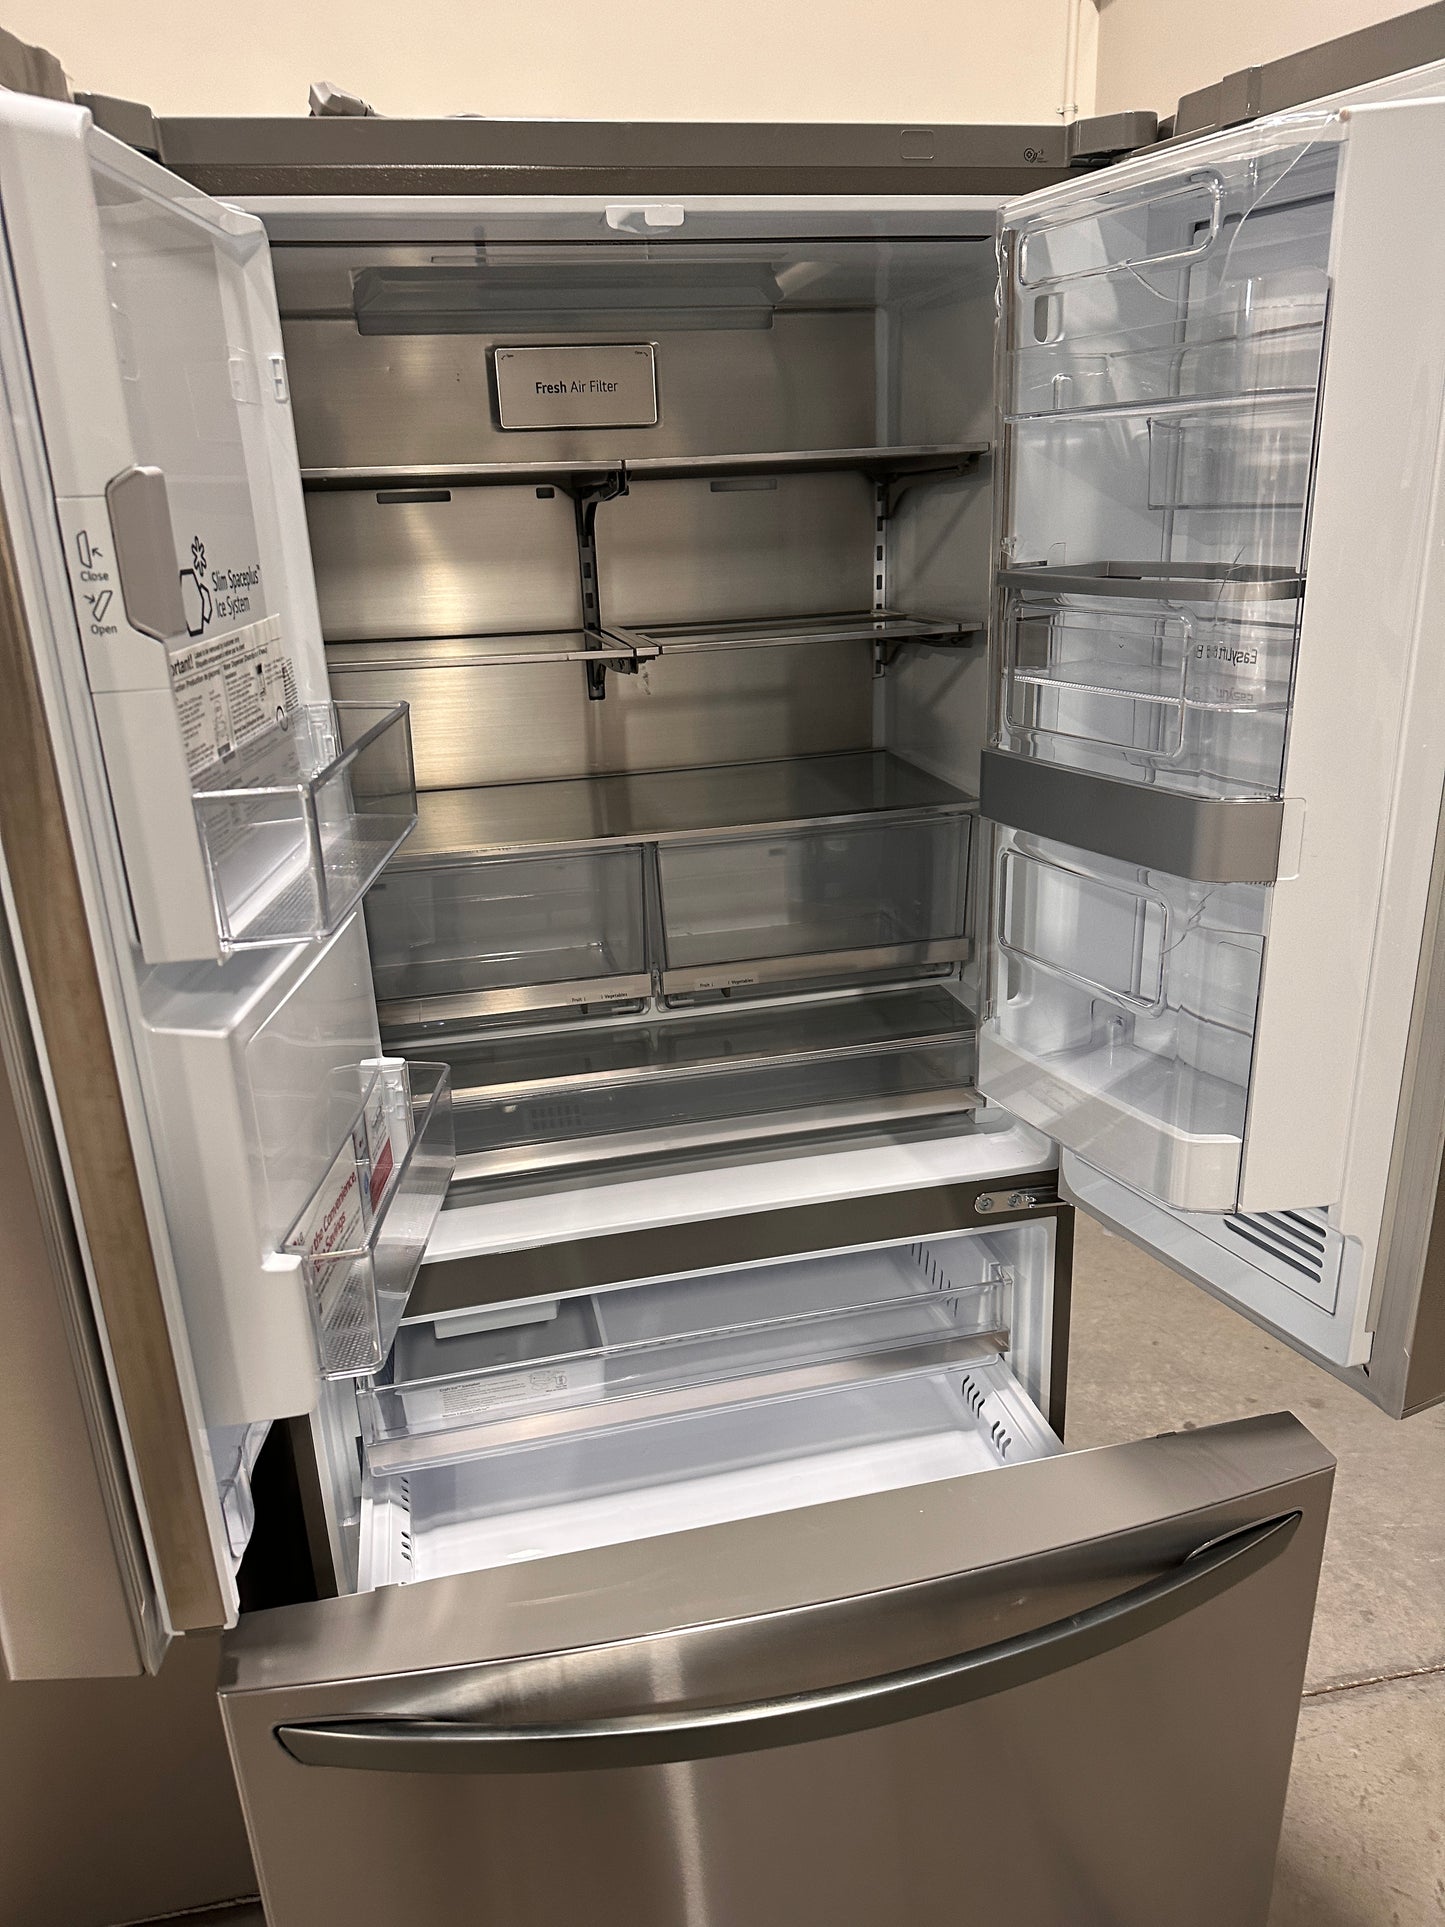 NEW COUNTER DEPTH REFRIGERATOR WITH CRAFT ICE MAKER - REF12149 - LRFDC2406S